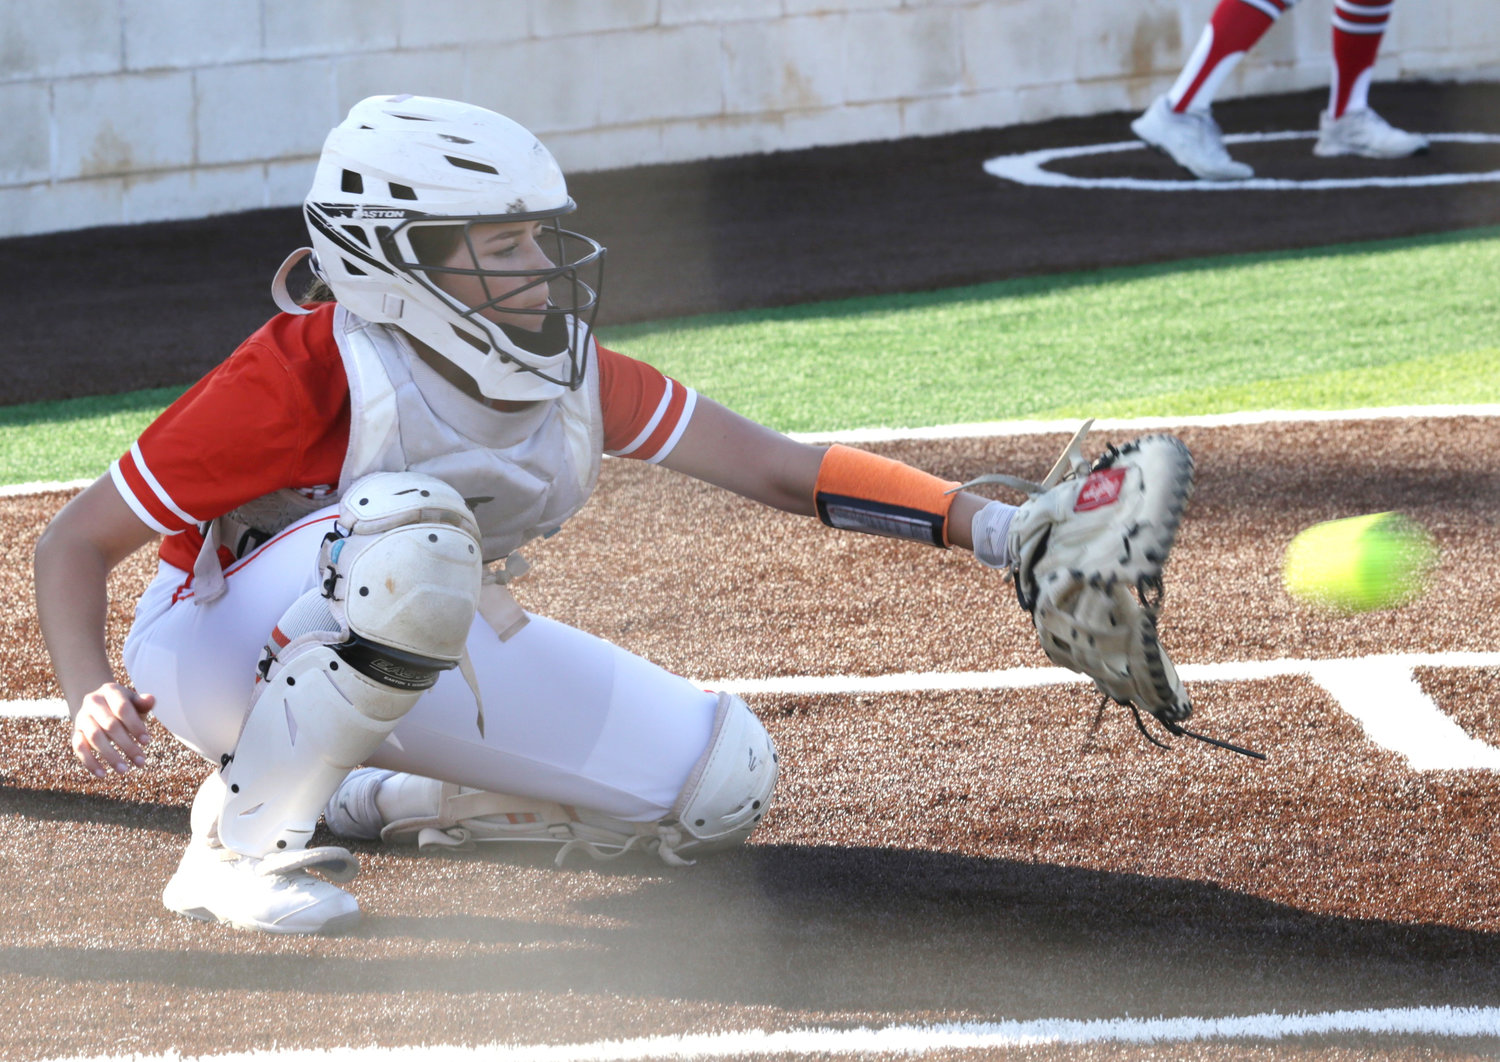 Lady Jacket catcher Jaycee Smith continued her excellent season behind the plate and gunned down a Lady Raider attempting to steal second base last Friday. Here she takes a well-placed pitch from Mineola starter Jadelyn Marshall.